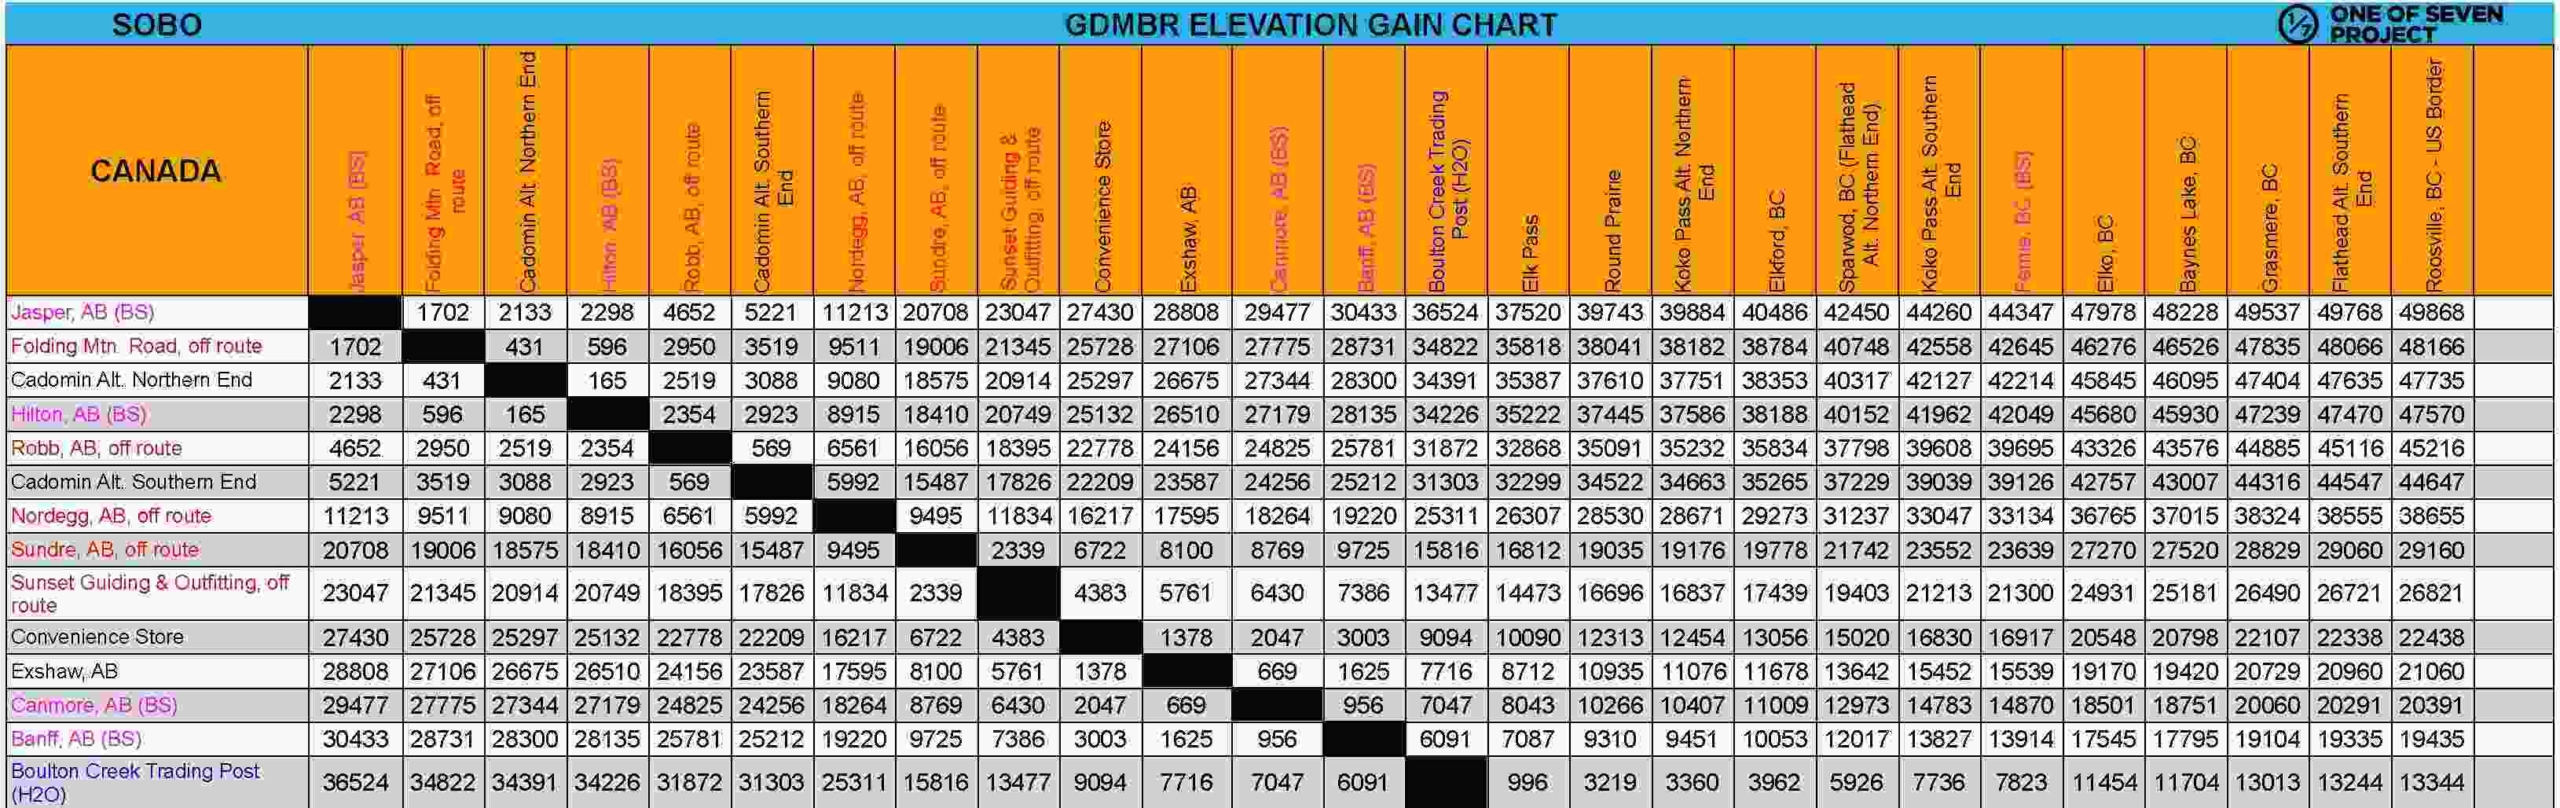 GDMBR, Elevation Gain Chart example- bikeepacking guide planning aids